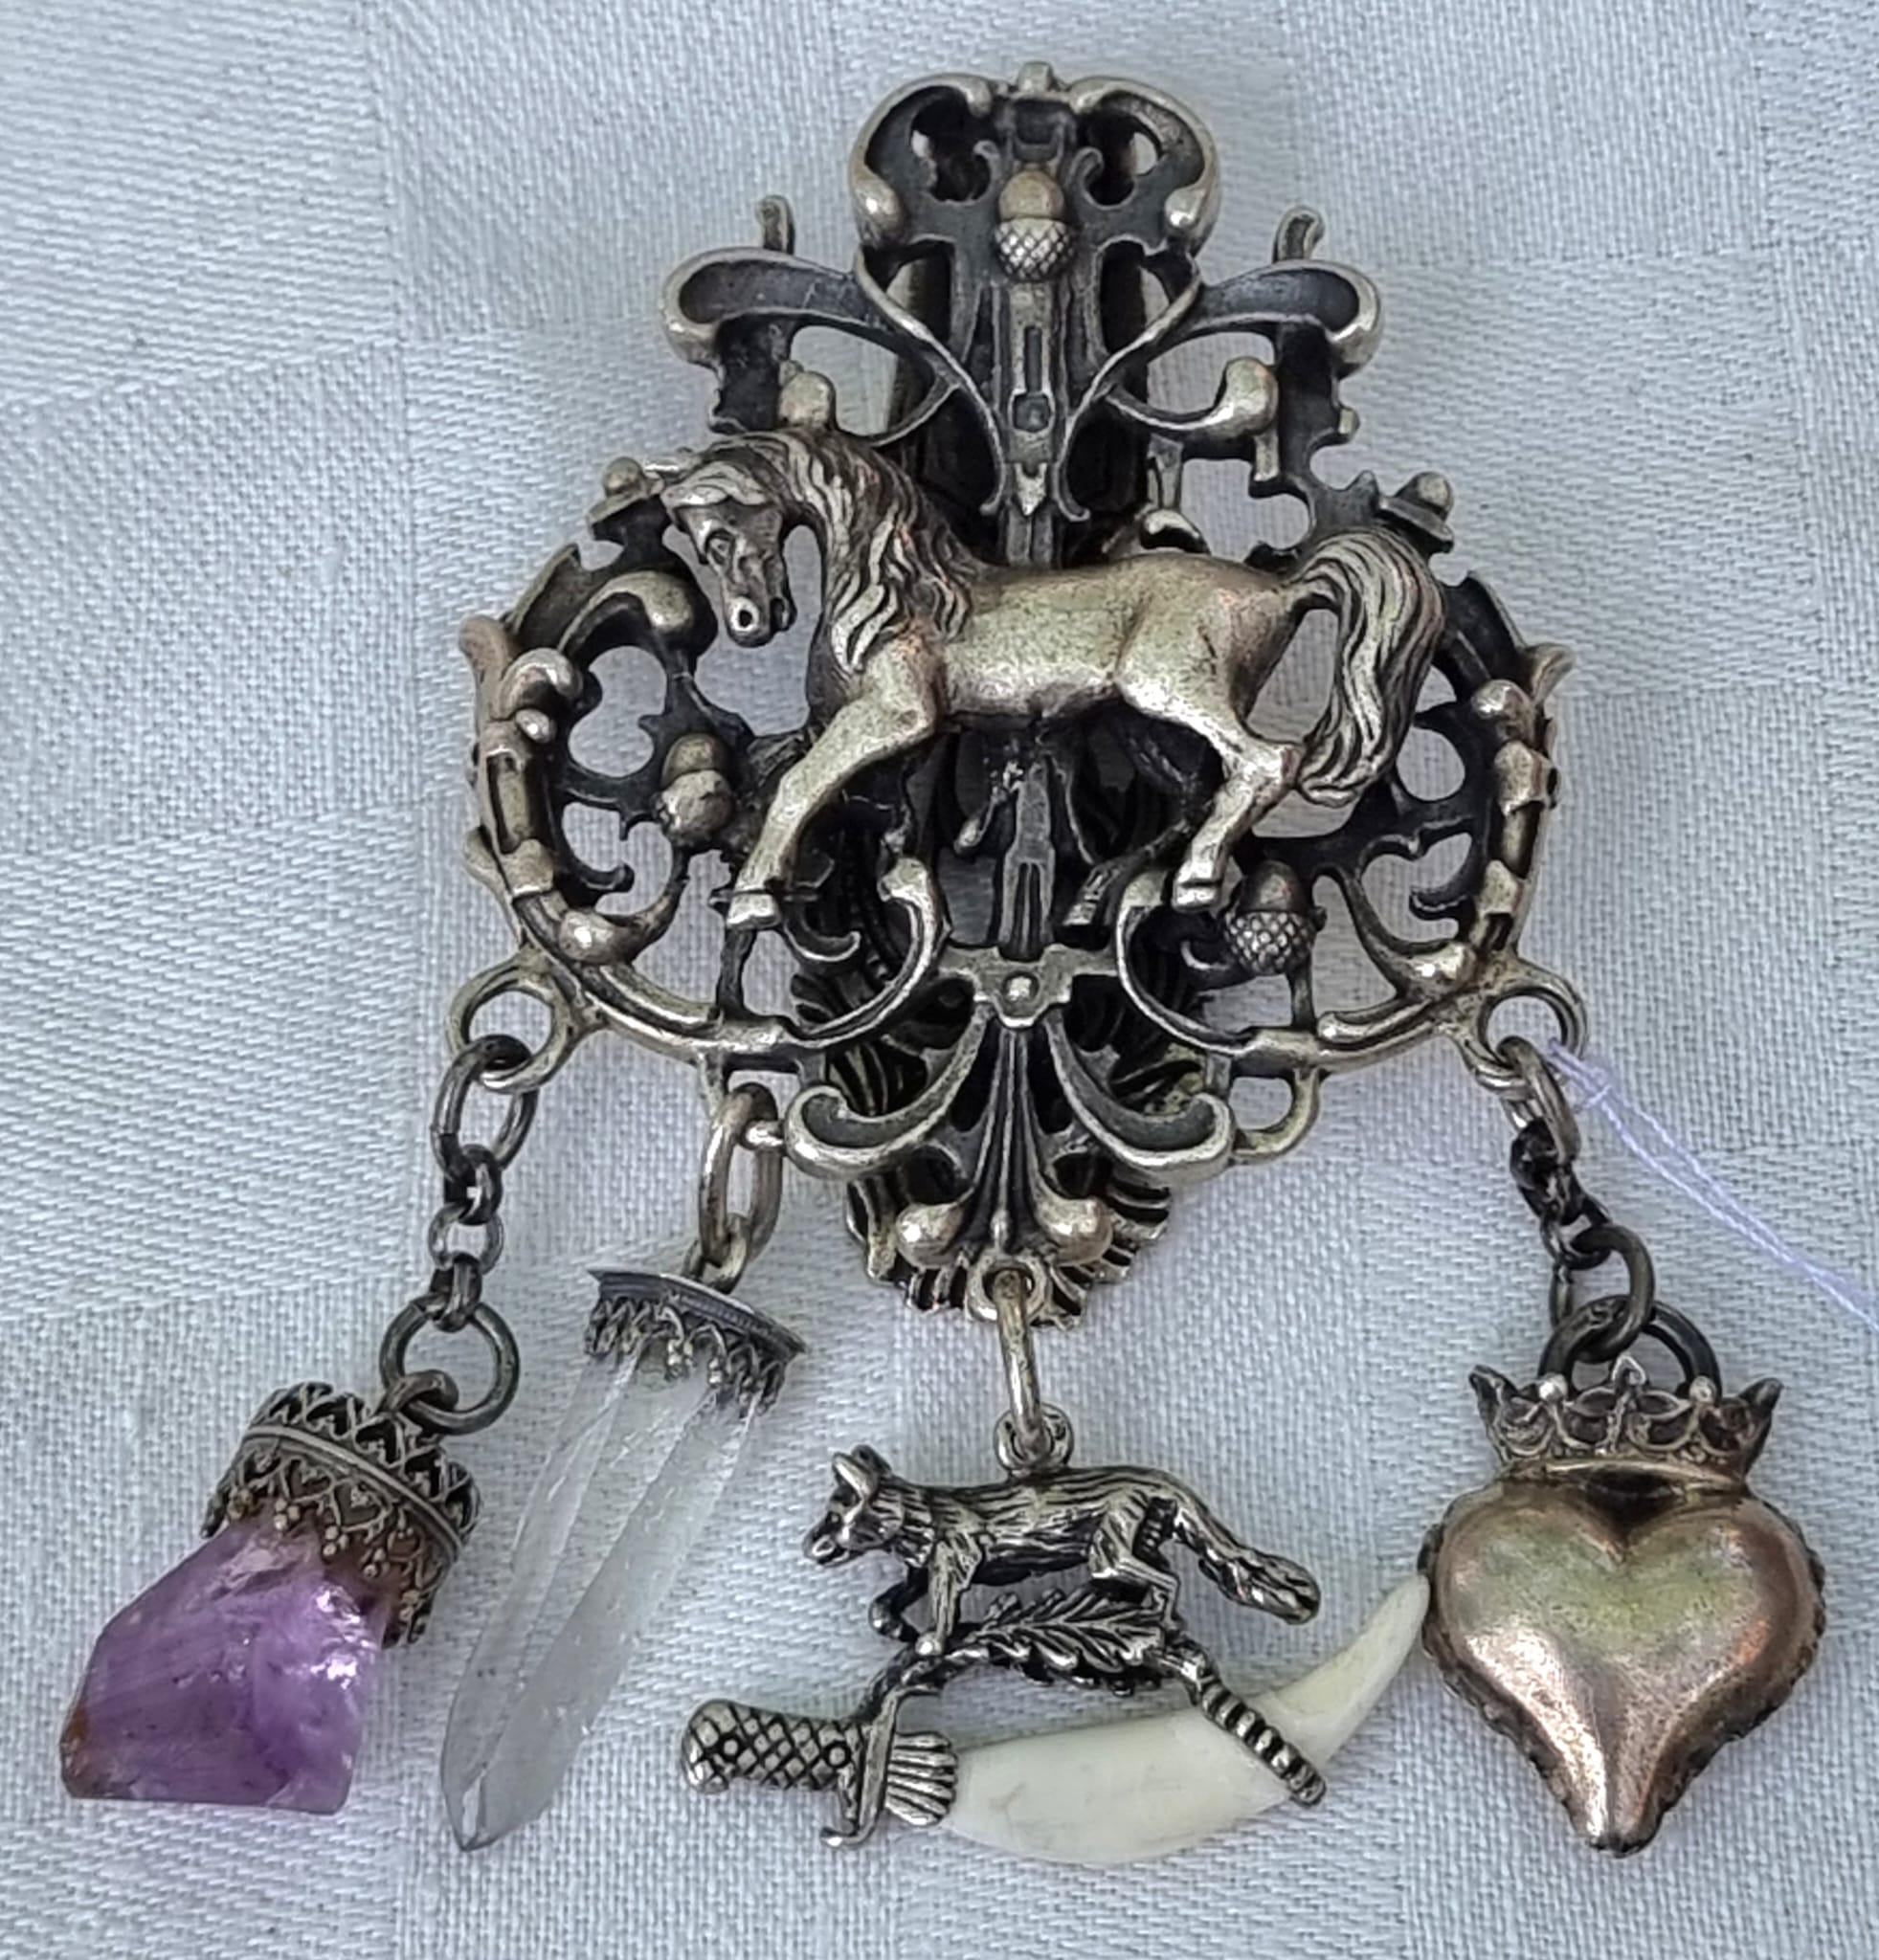 Magnificent antique chatelaine in solid silver with waist clip,
800 silver, hallmarked,
year 1866, signed 